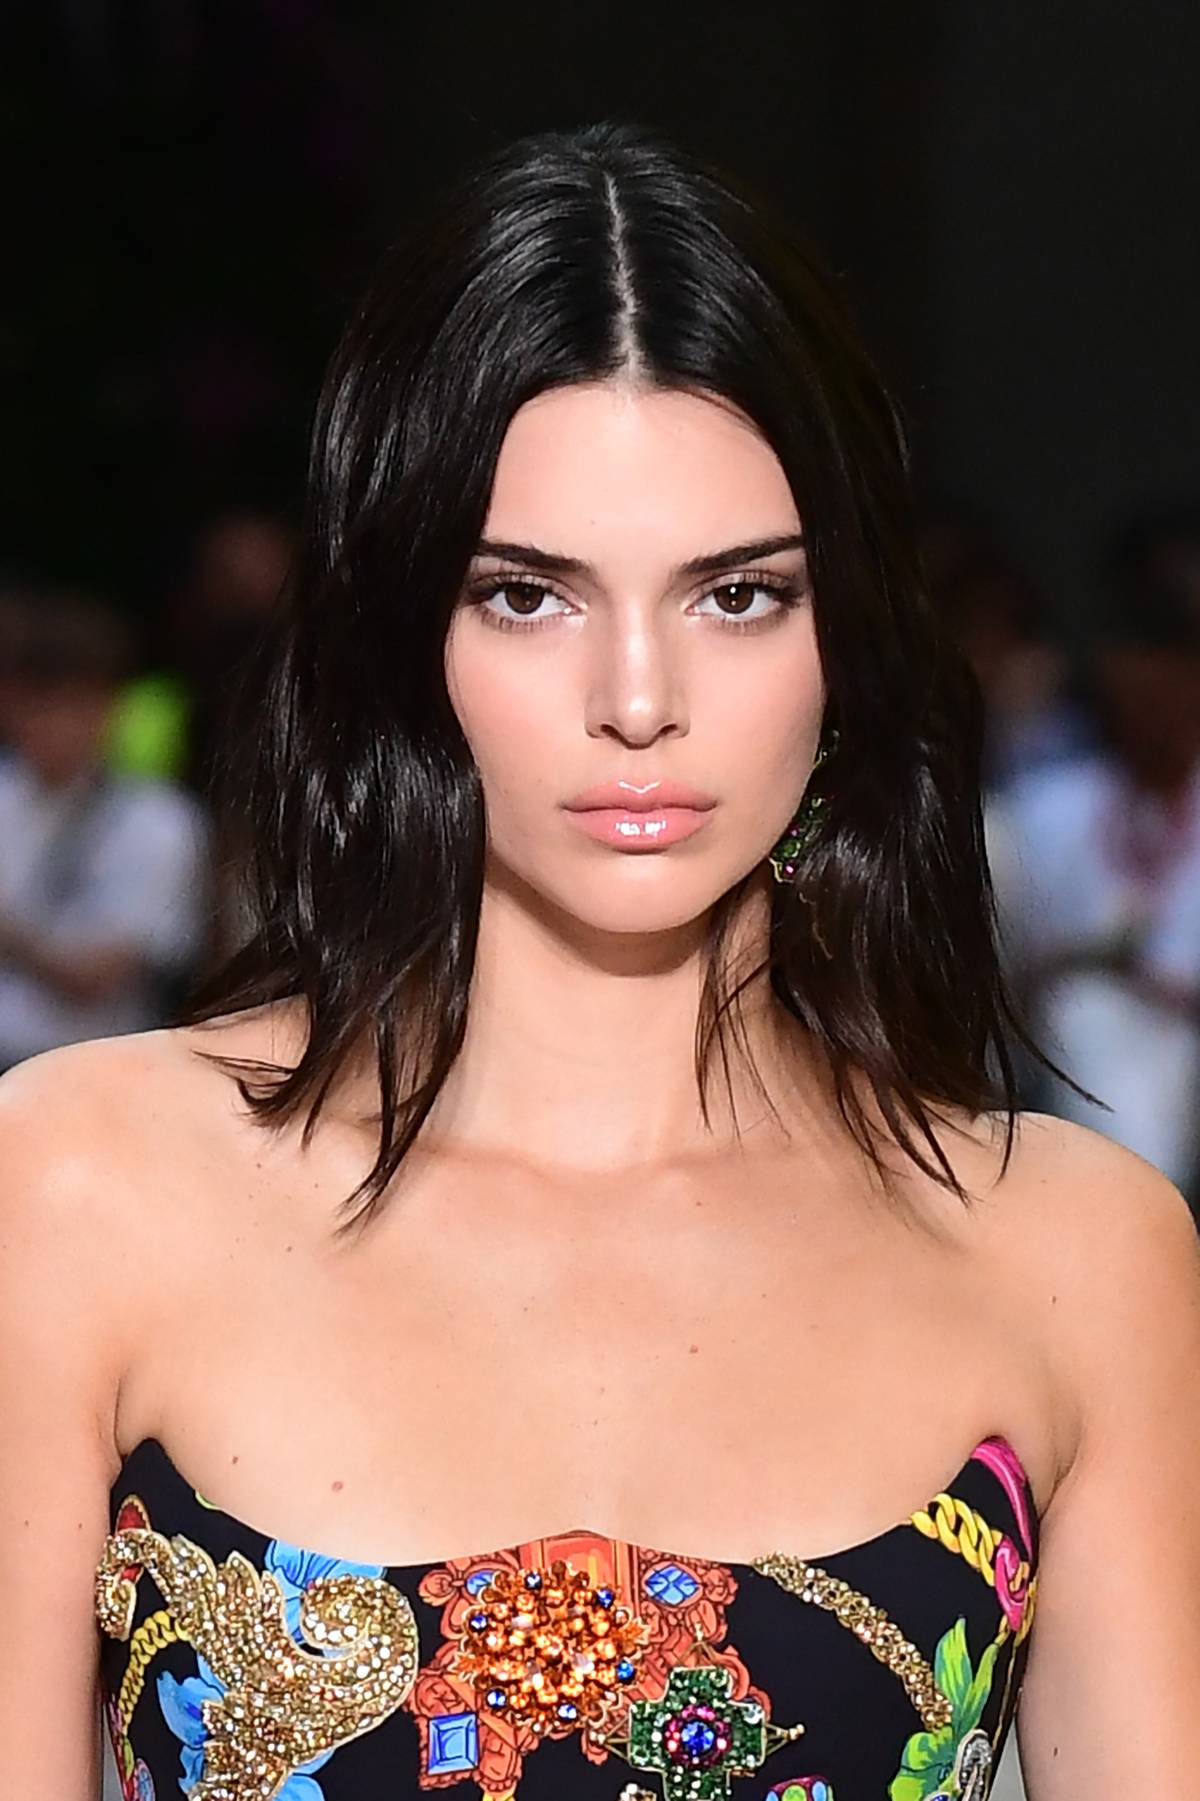 Kendall Jenner Clarifies 'Love' Magazine Model Comments on Twitter